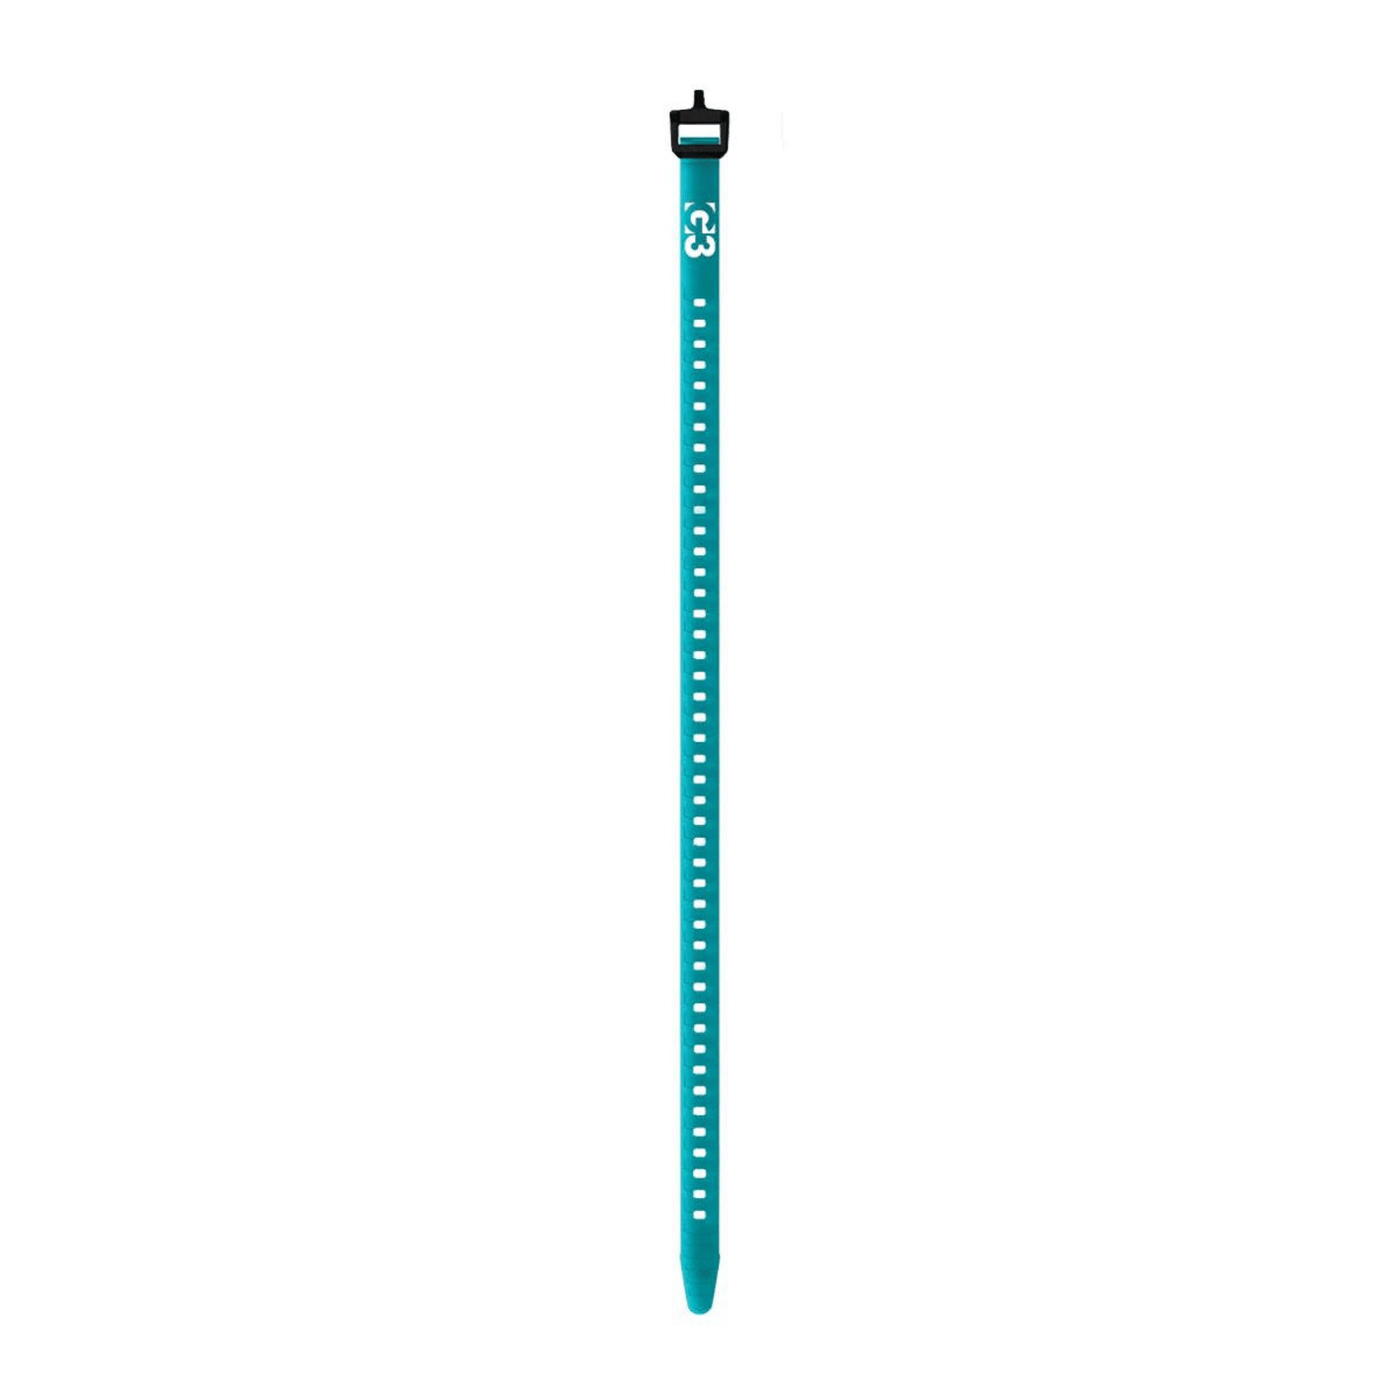 G3 Ski Strap - 500mm | Backcountry & Skiing Gear | Further Faster Christchurch NZ #glide-teal